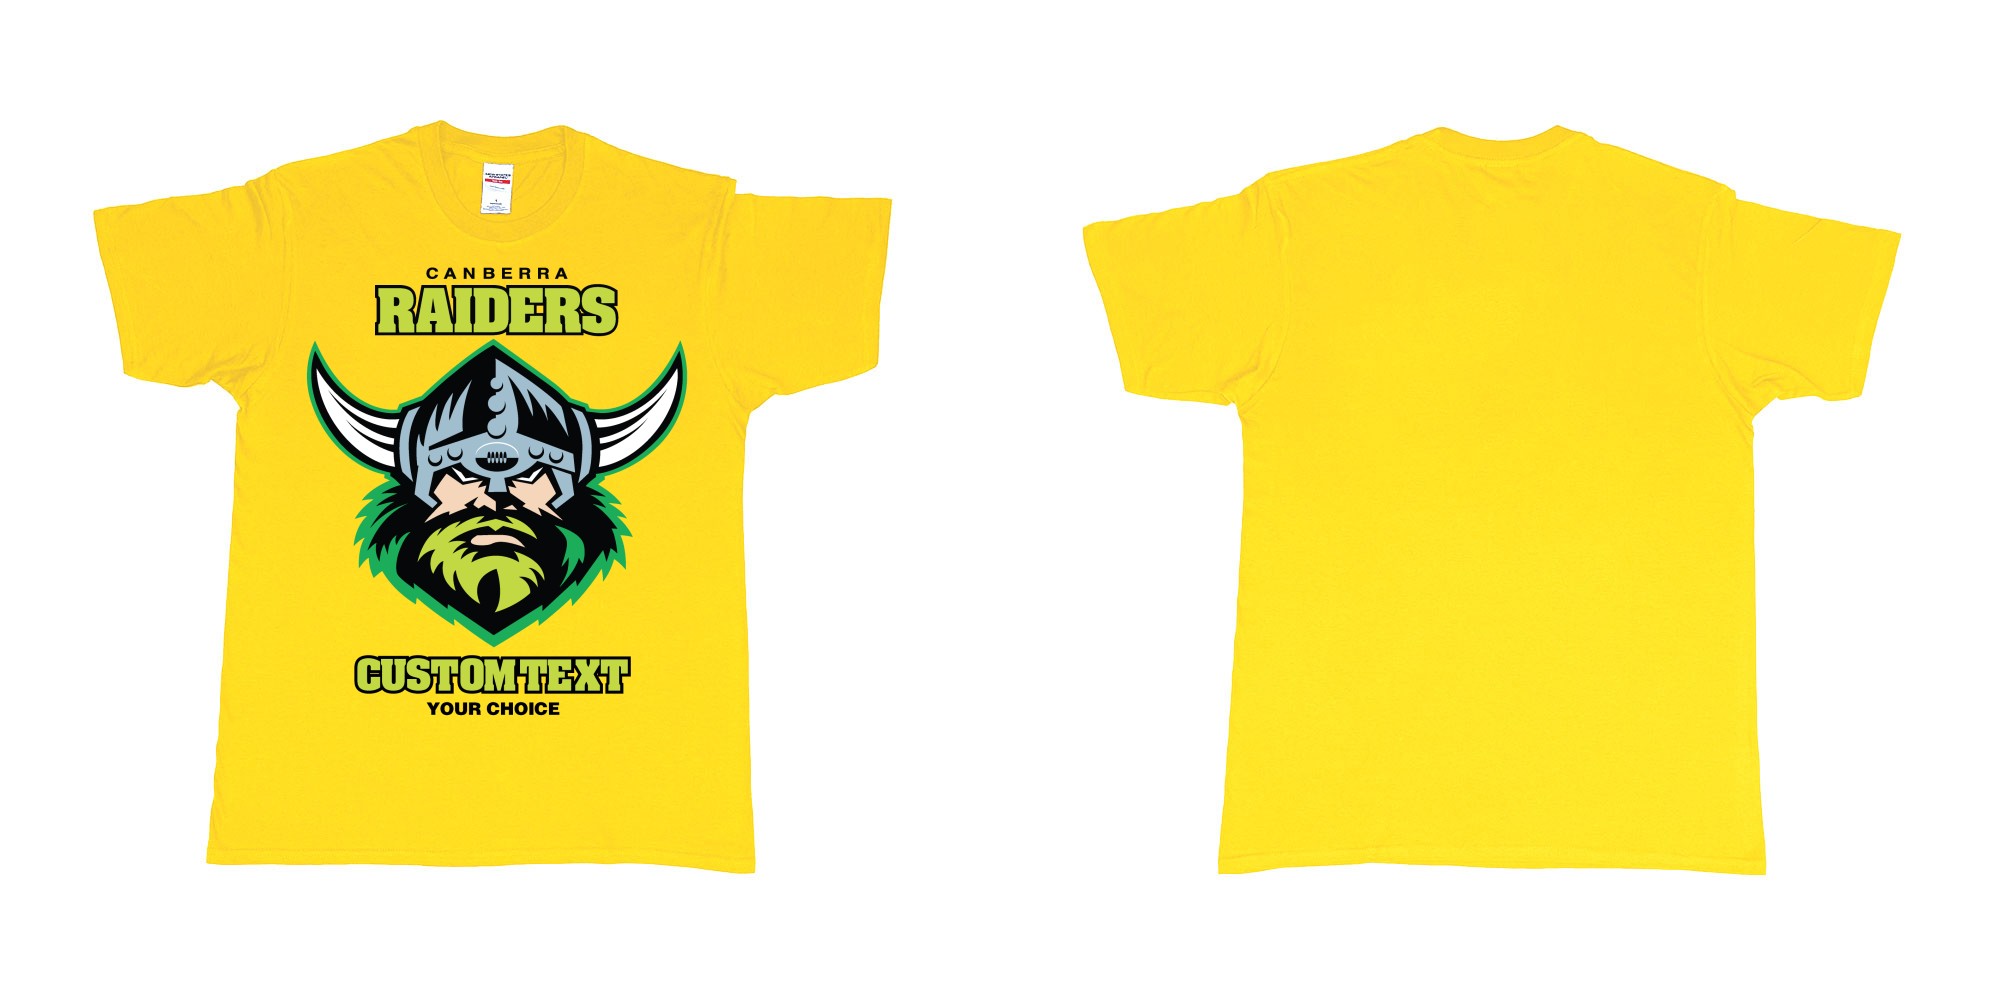 Custom tshirt design canberra raiders nrl logo own printed text near you in fabric color daisy choice your own text made in Bali by The Pirate Way